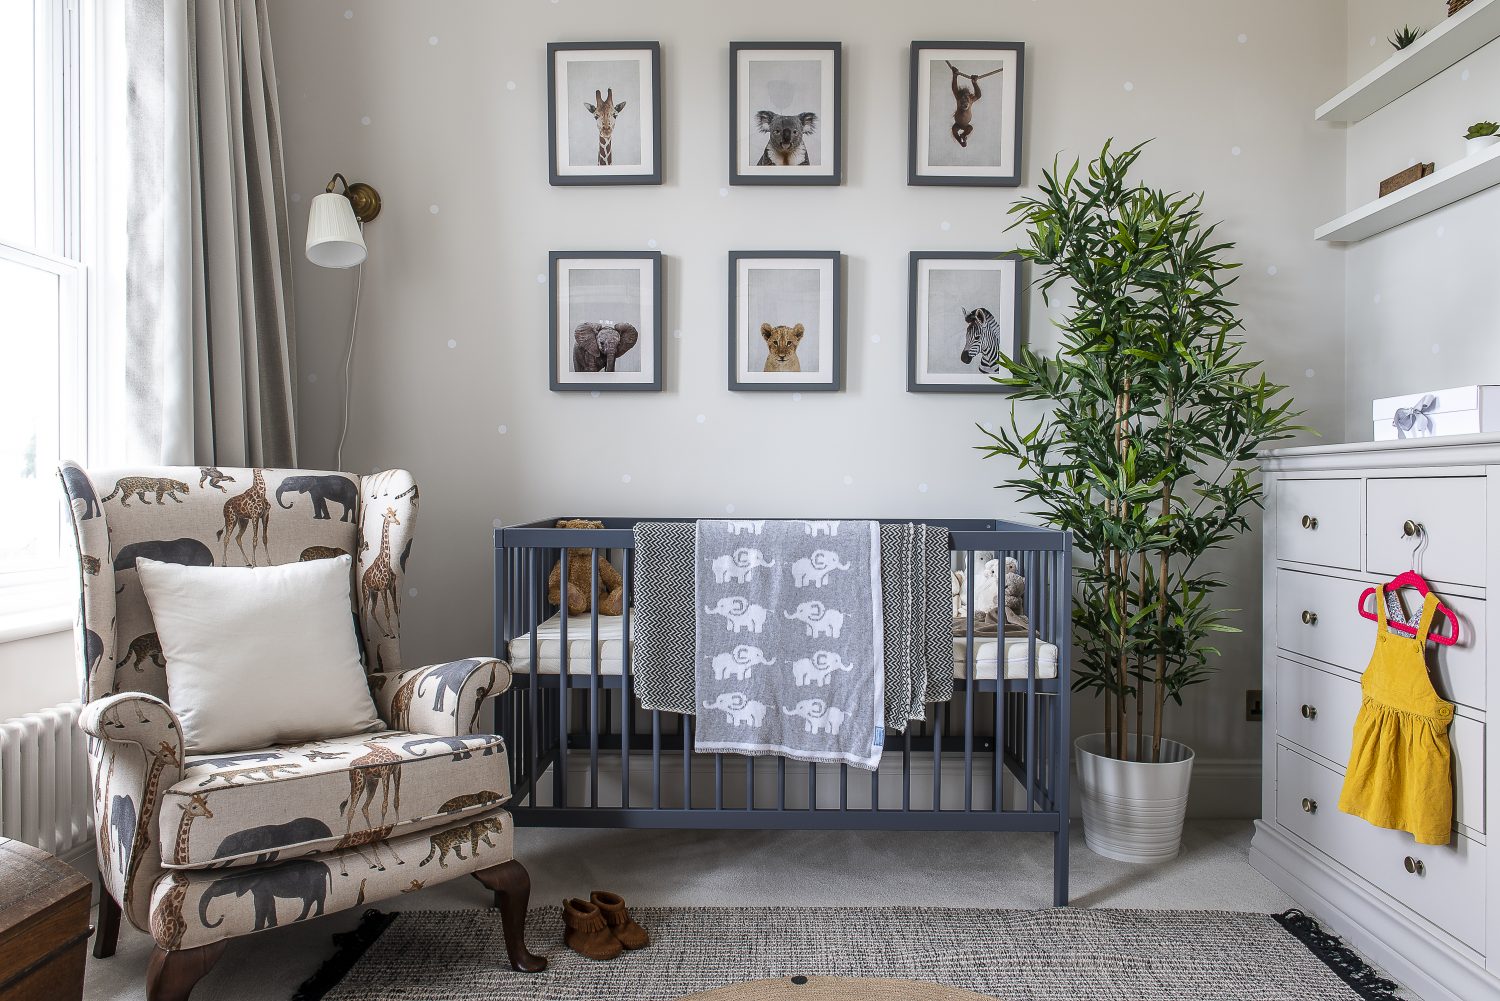 The nursery wallpaper features subtle polka dots on a soft grey background. Zoe had the chair reupholstered in African animal fabric